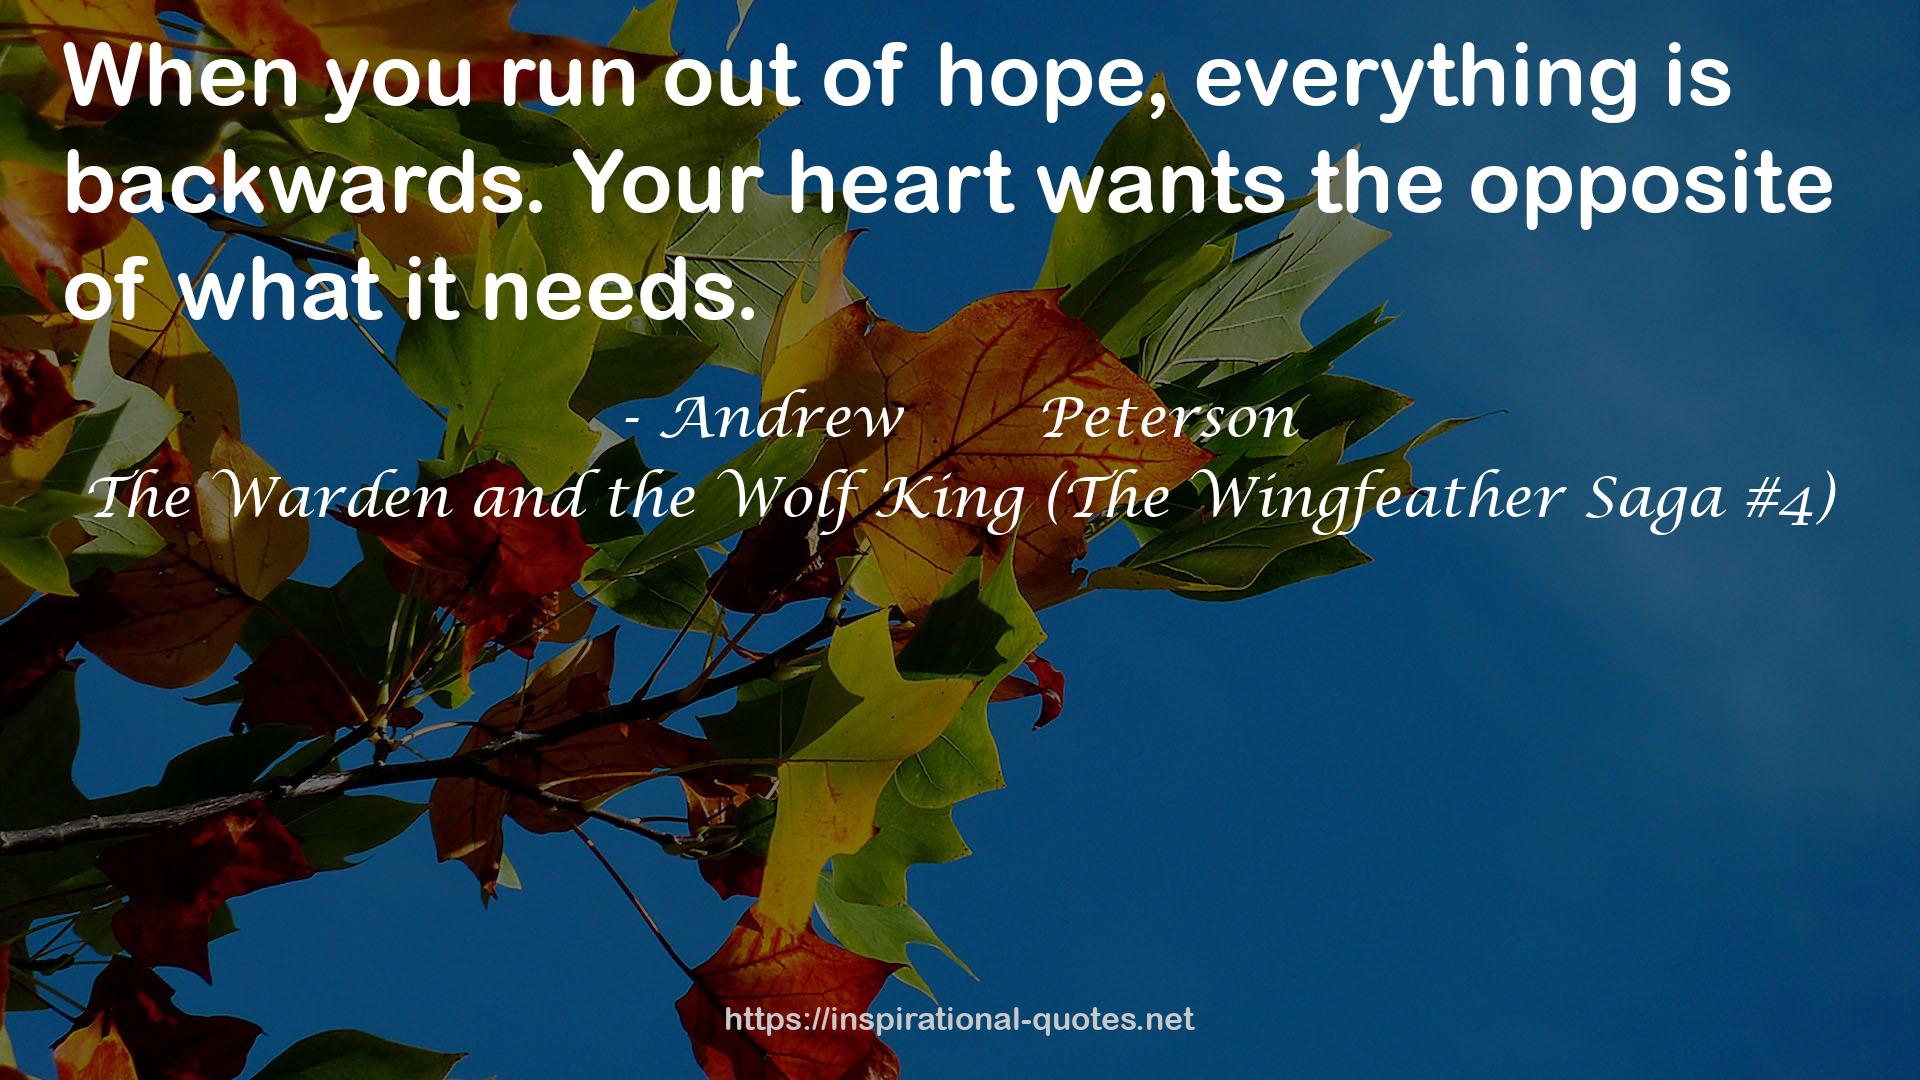 The Warden and the Wolf King (The Wingfeather Saga #4) QUOTES